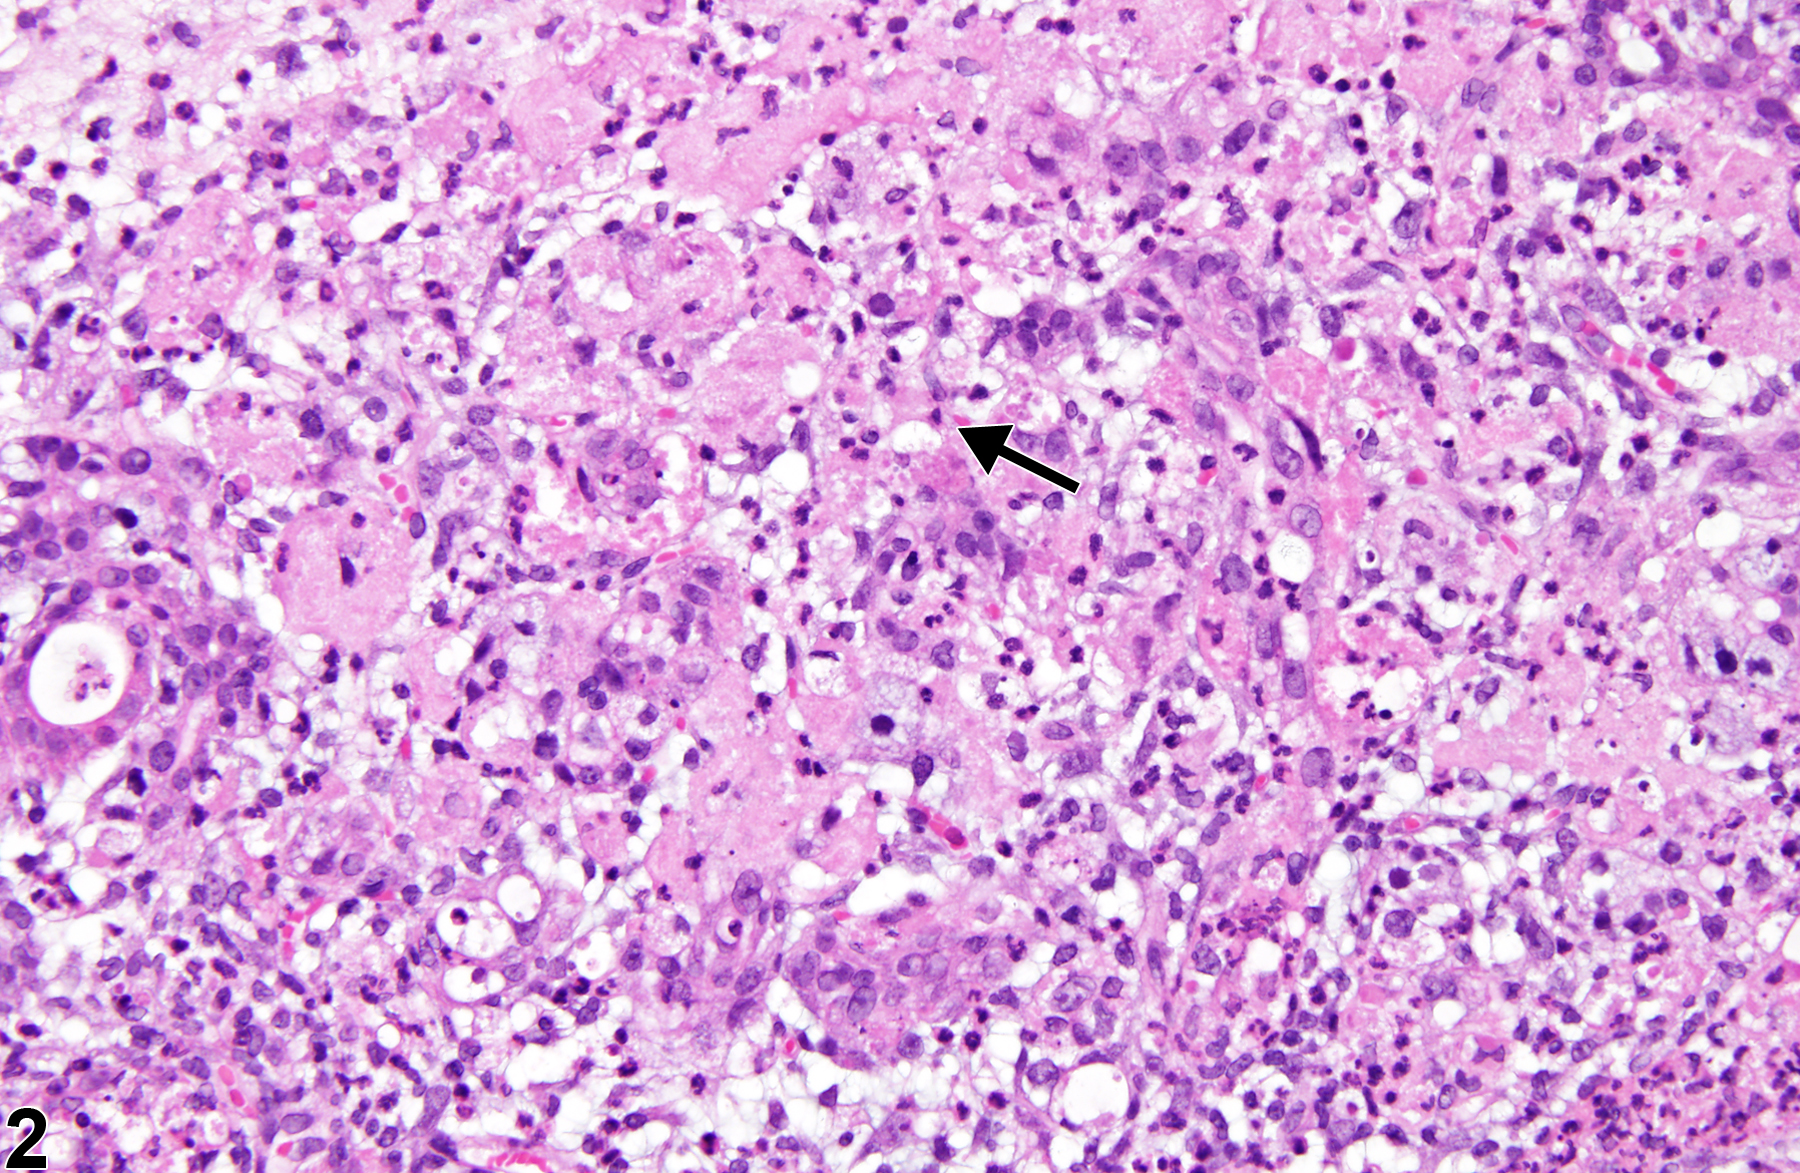 Image of inflammation in the salivary gland from a male F344/N rat in a subchronic study